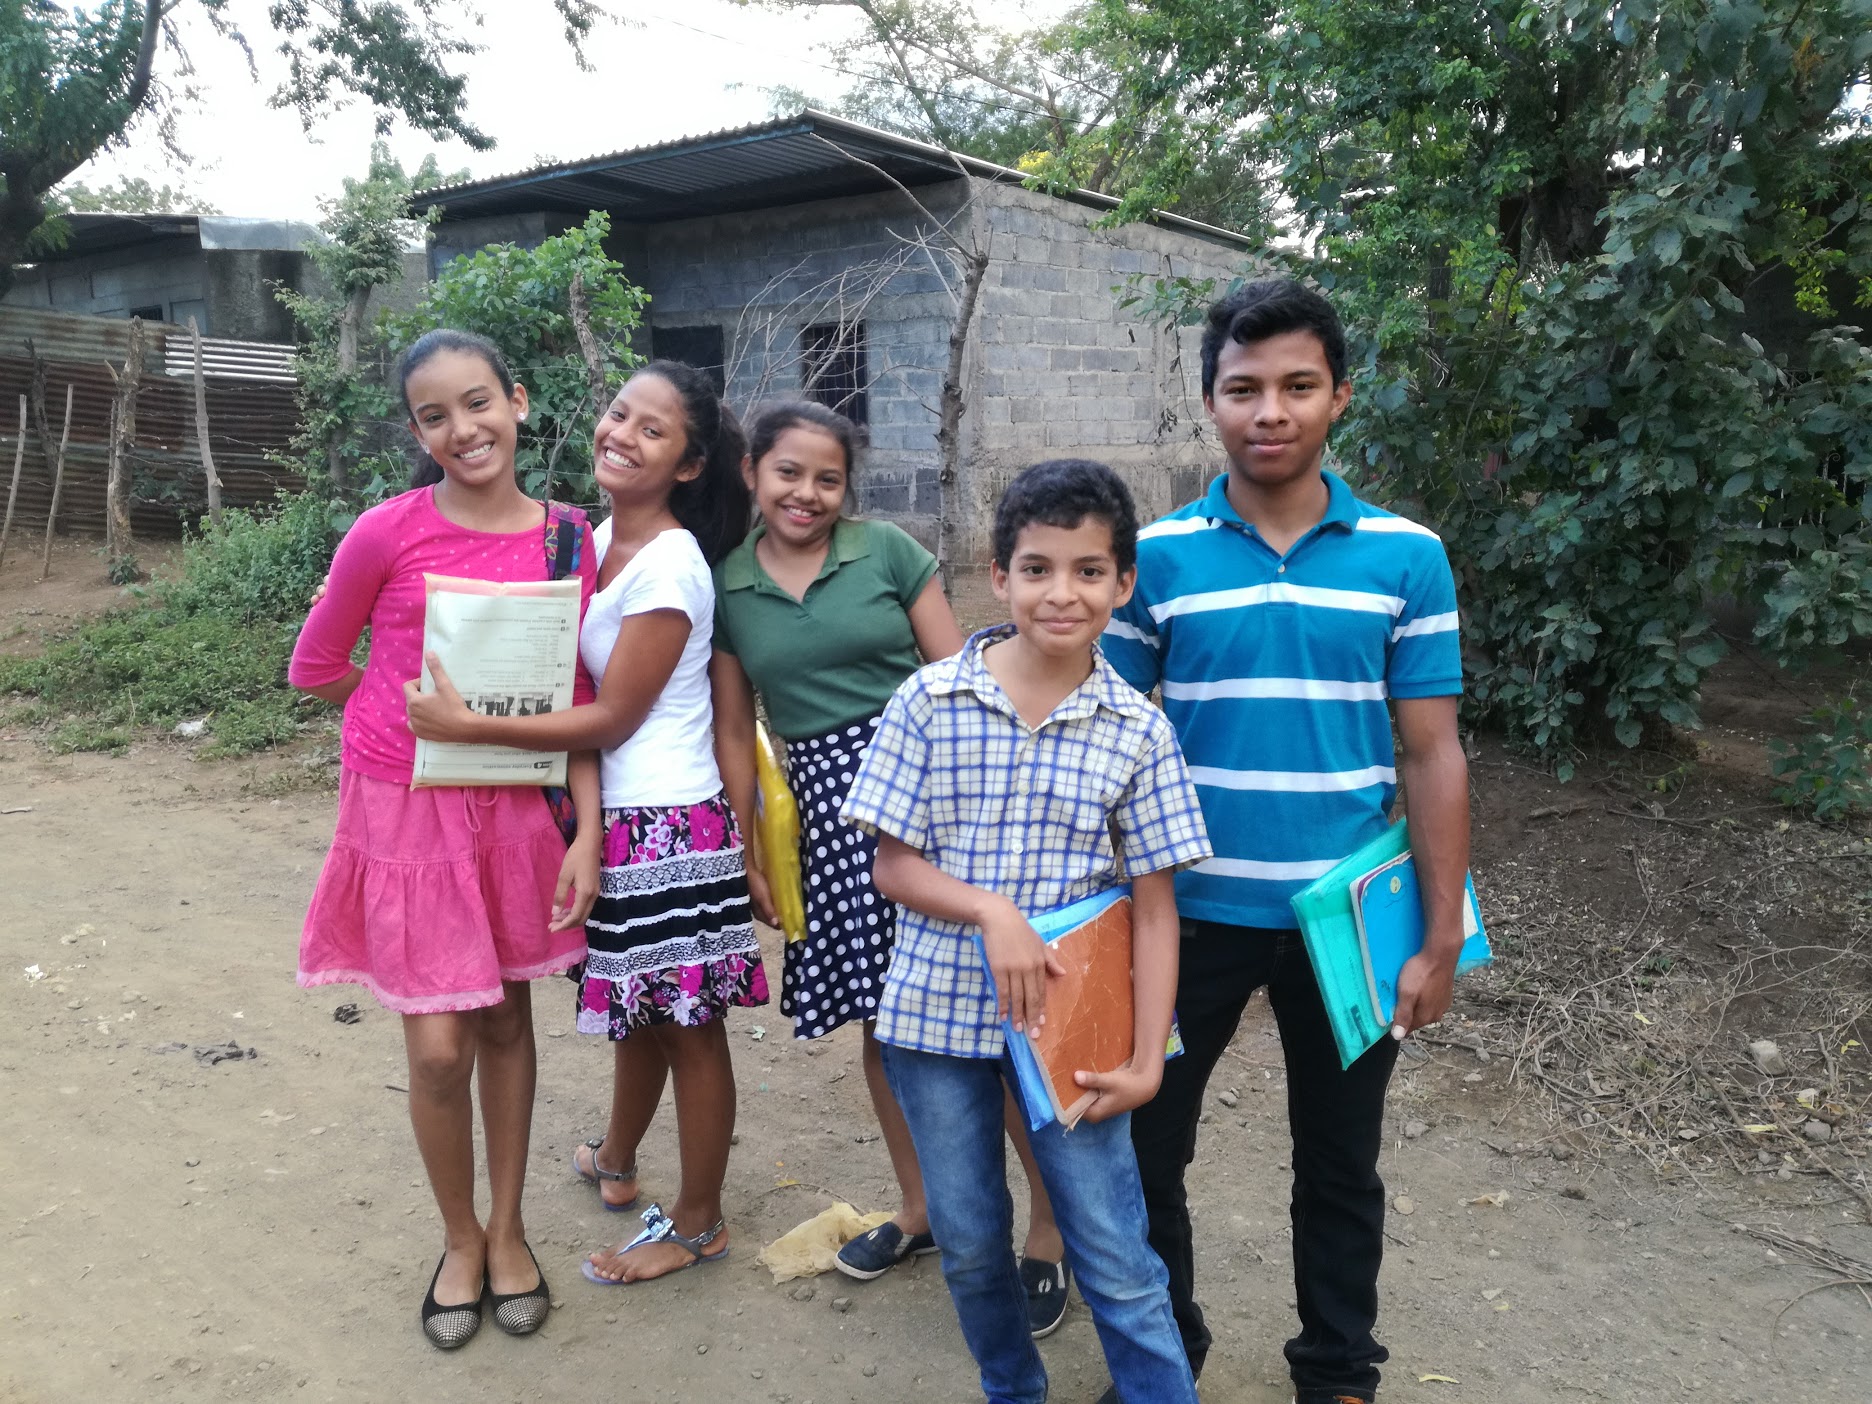 ESL students in Nicaragua with their books